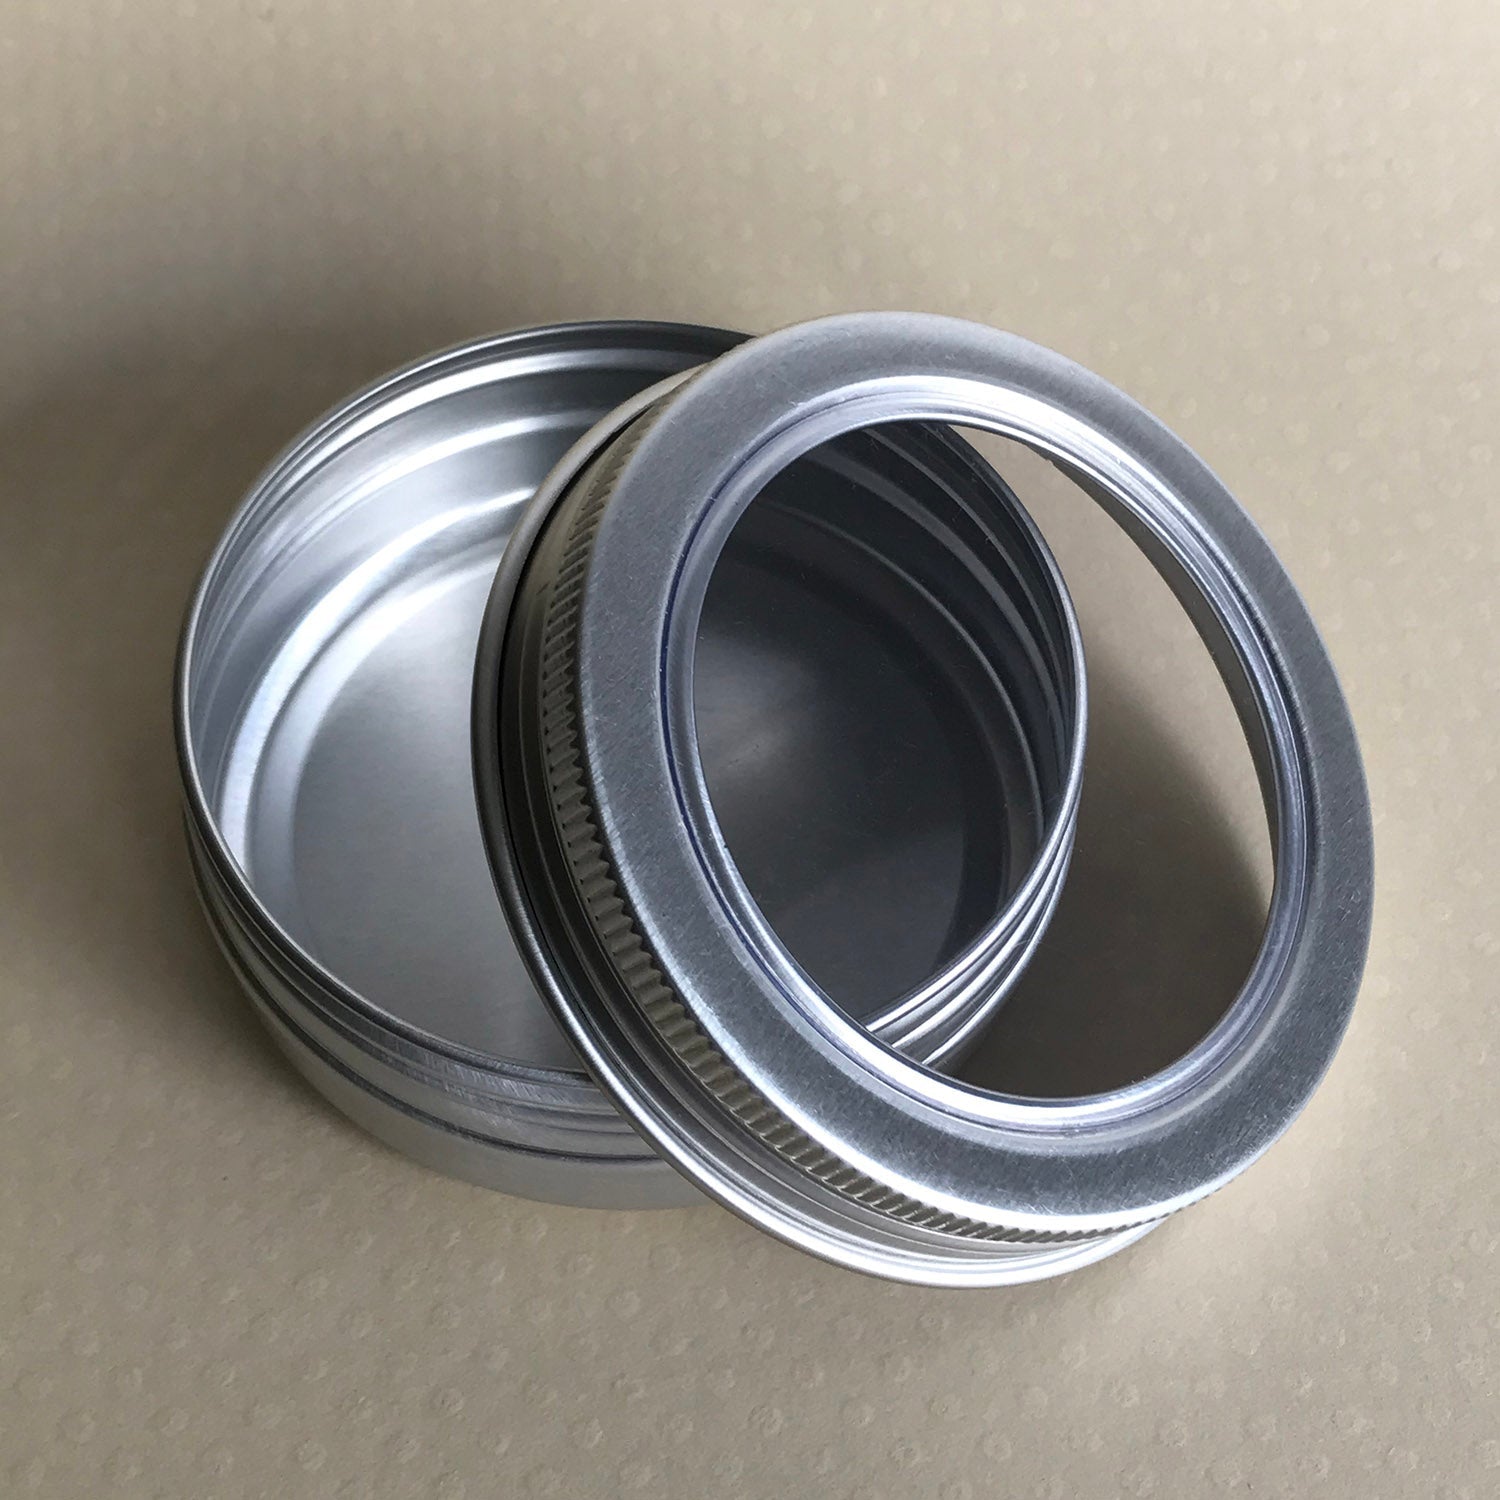 Aluminum Tin Cans Storage Containers - Buttons Galore and More